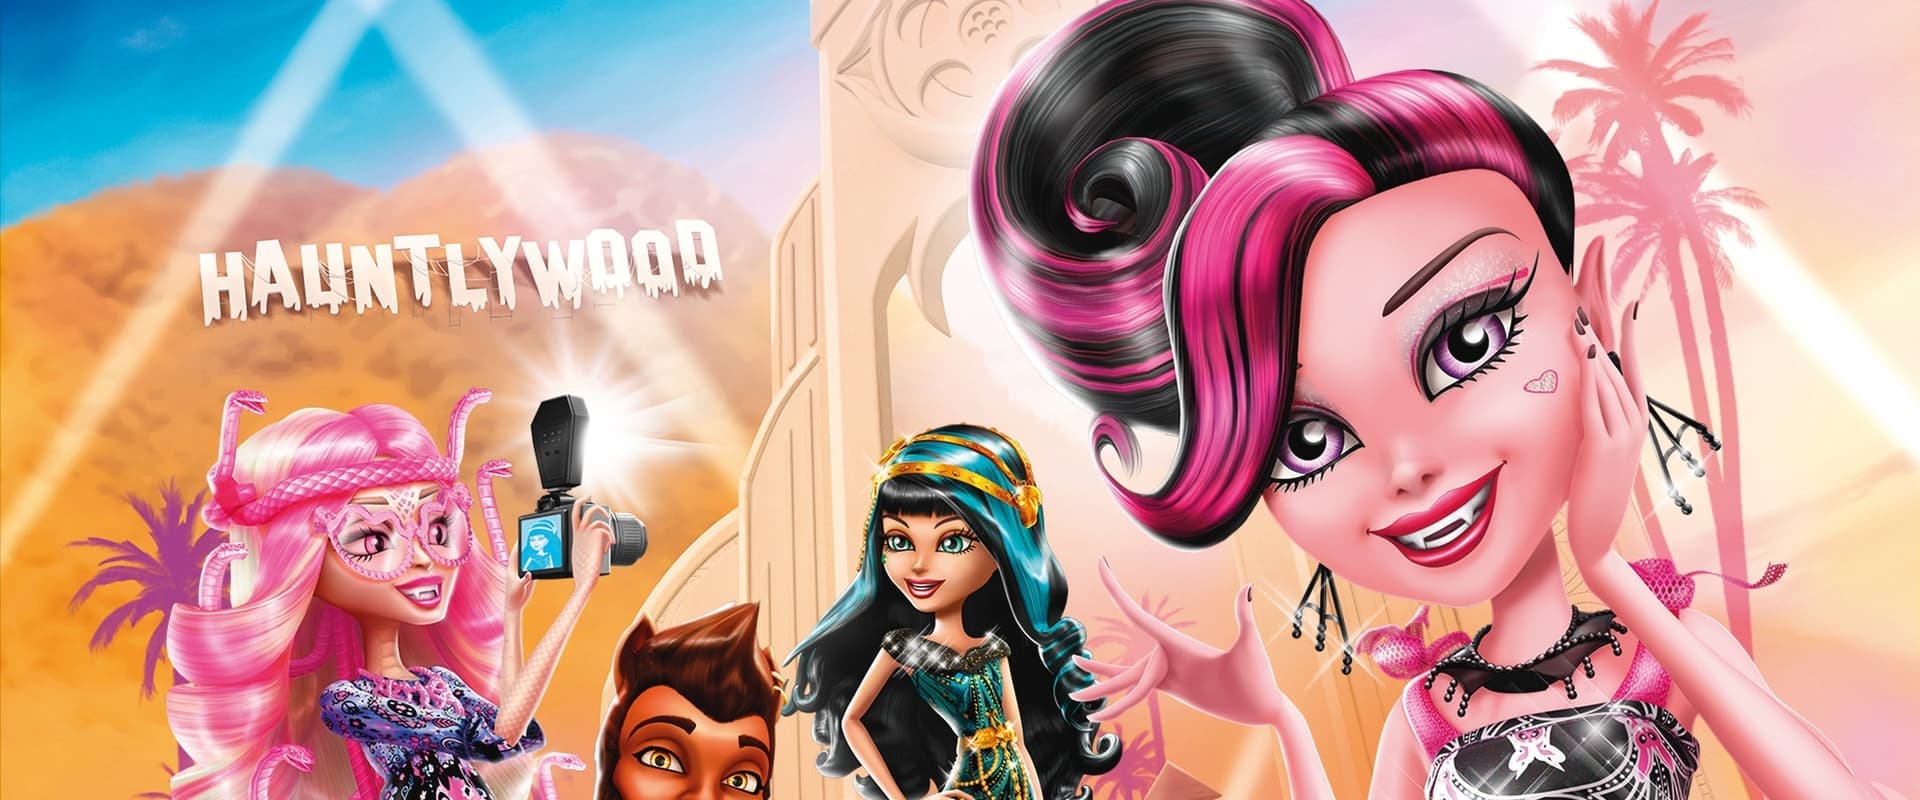 Monster High: Frights, Camera, Action!